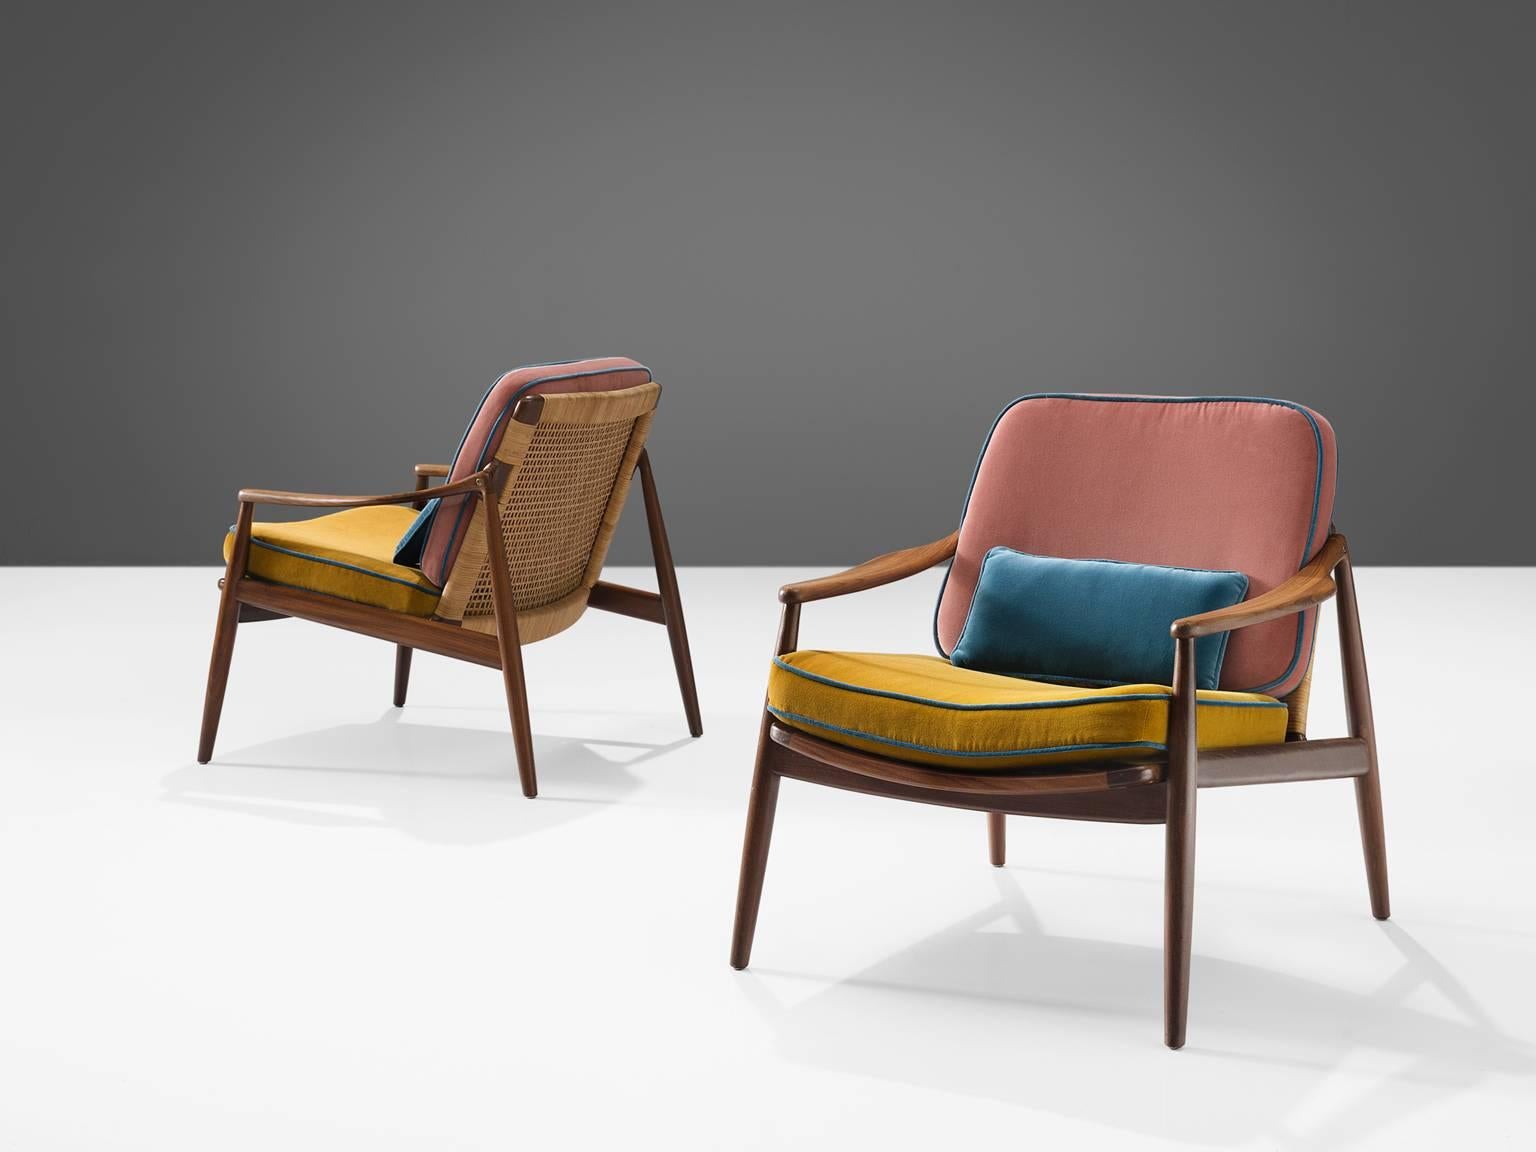 Hartmut Lohmeyer for Wilkhahn, armchairs,  teak, cane, blue, yellow, pink velvet upholstery, Germany, design 1956, production 1960s.

This low reclining armchair is sensuous and is organically shaped. They feature a slightly tilted back and are